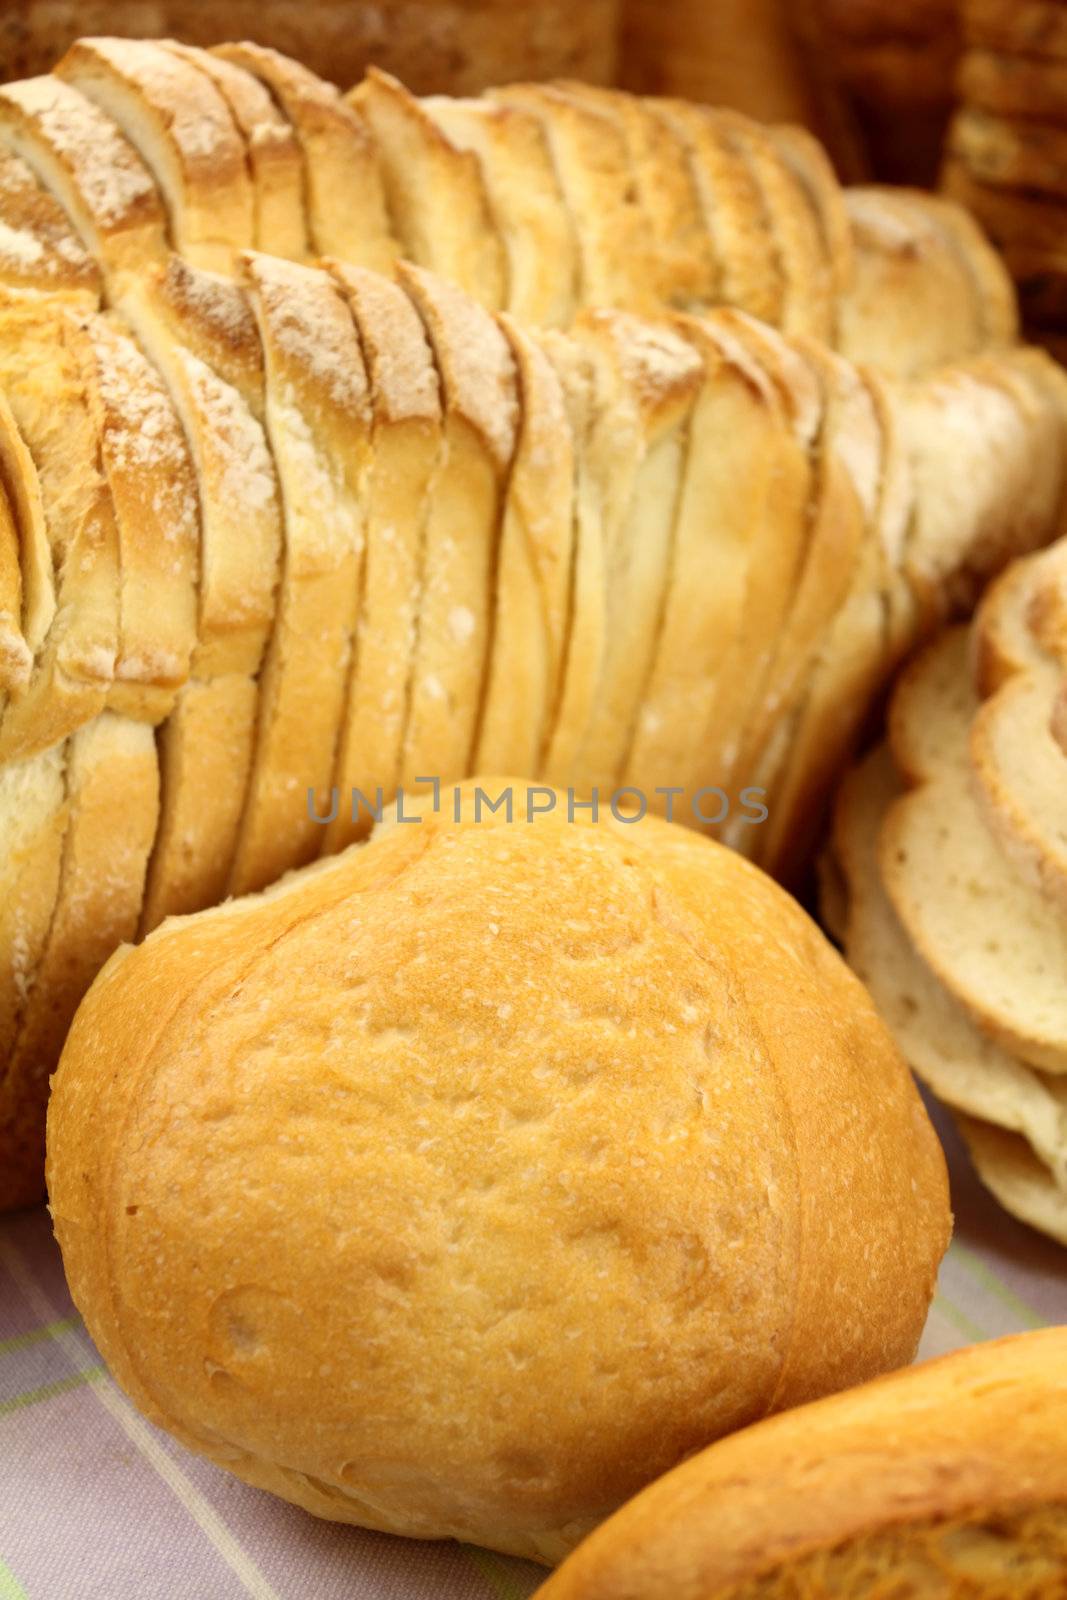 Background of a bread roll against sliced white bread showing textures.